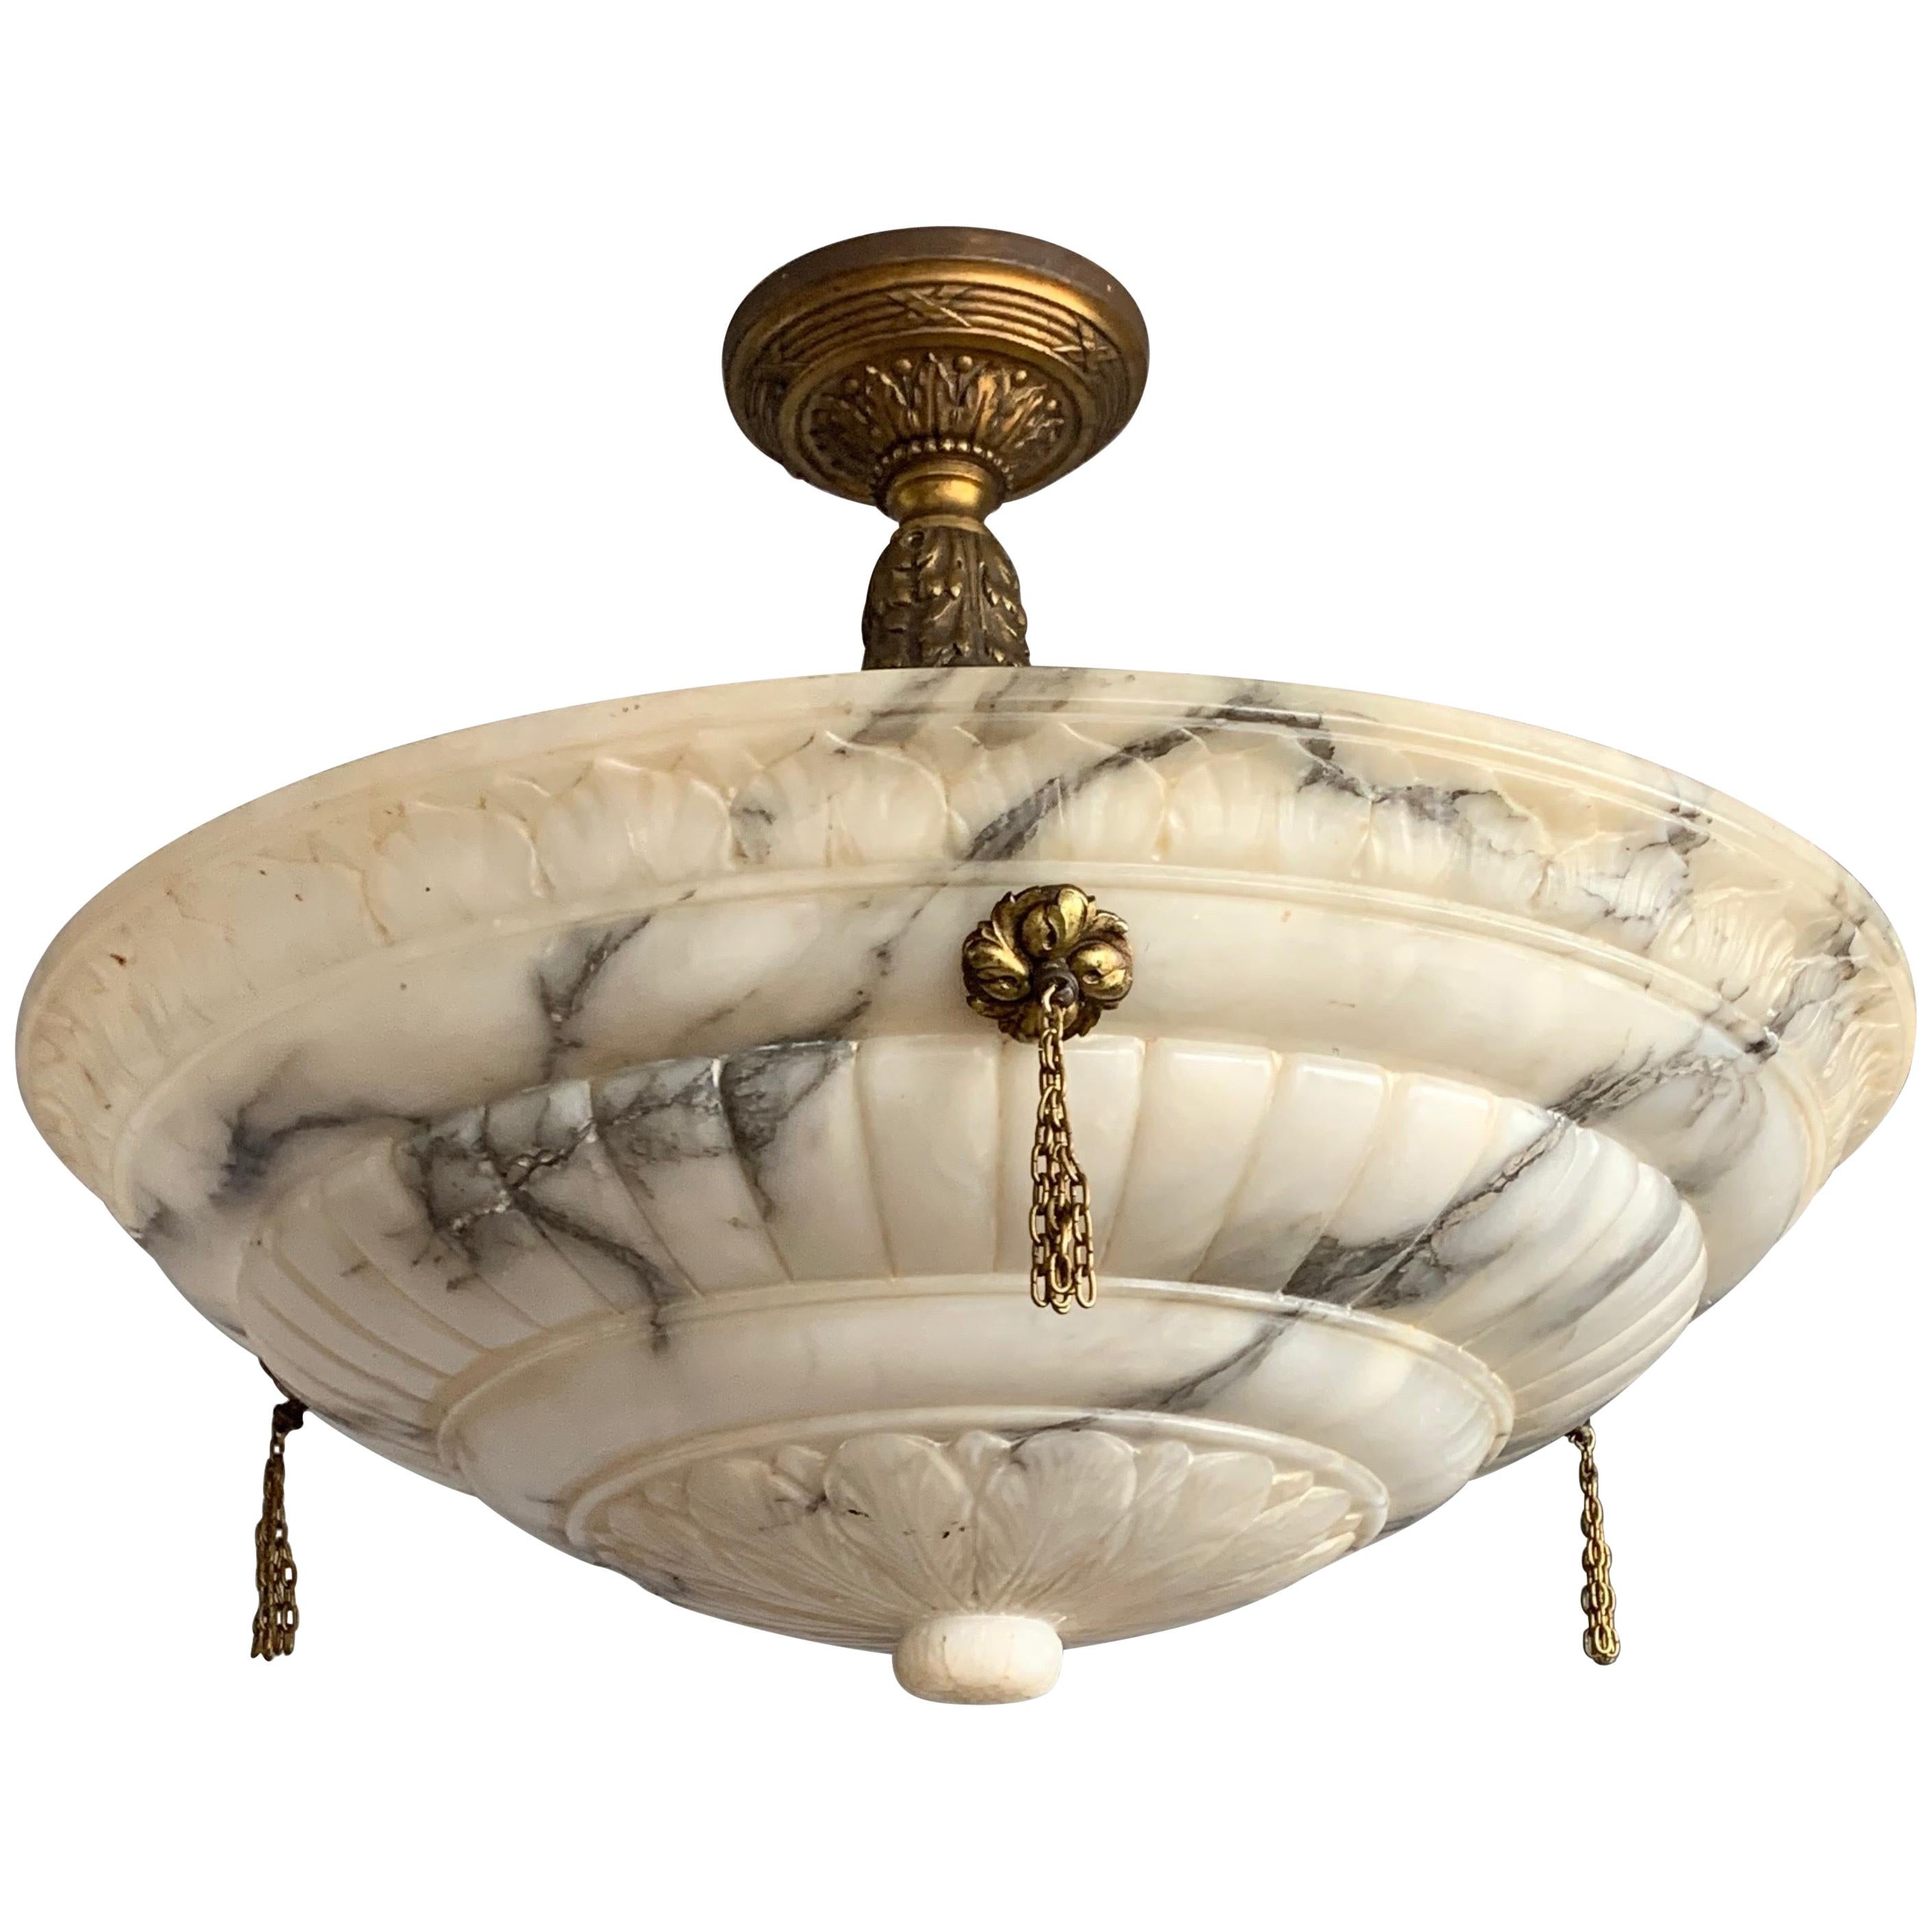 Another amazing and impressive Arts and Crafts, early 20th century chandelier.

This Magnificent Creation of Mother Nature from the early 20th century, large alabaster pendant or flush mount comes with a stylish rope and a bronze canopy. It is also